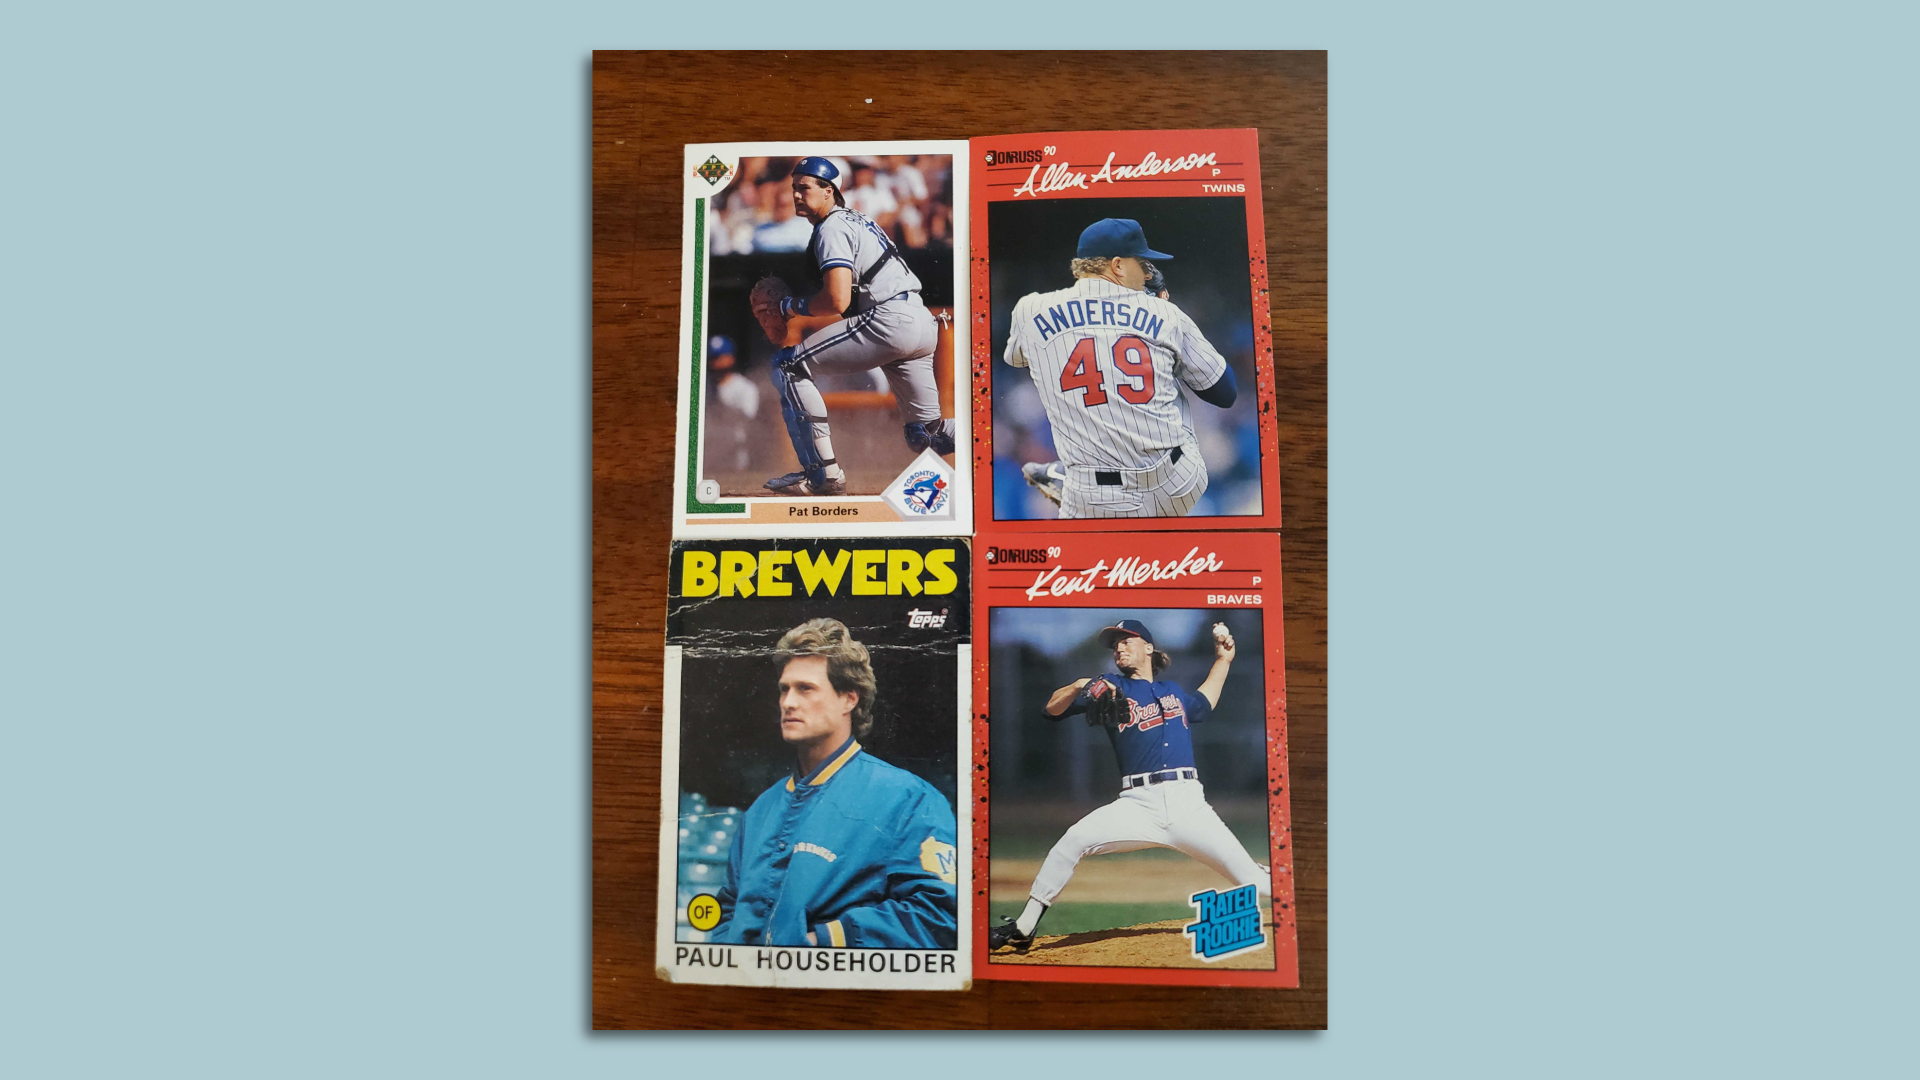 Three Central Ohio shops to visit for sports and trading cards